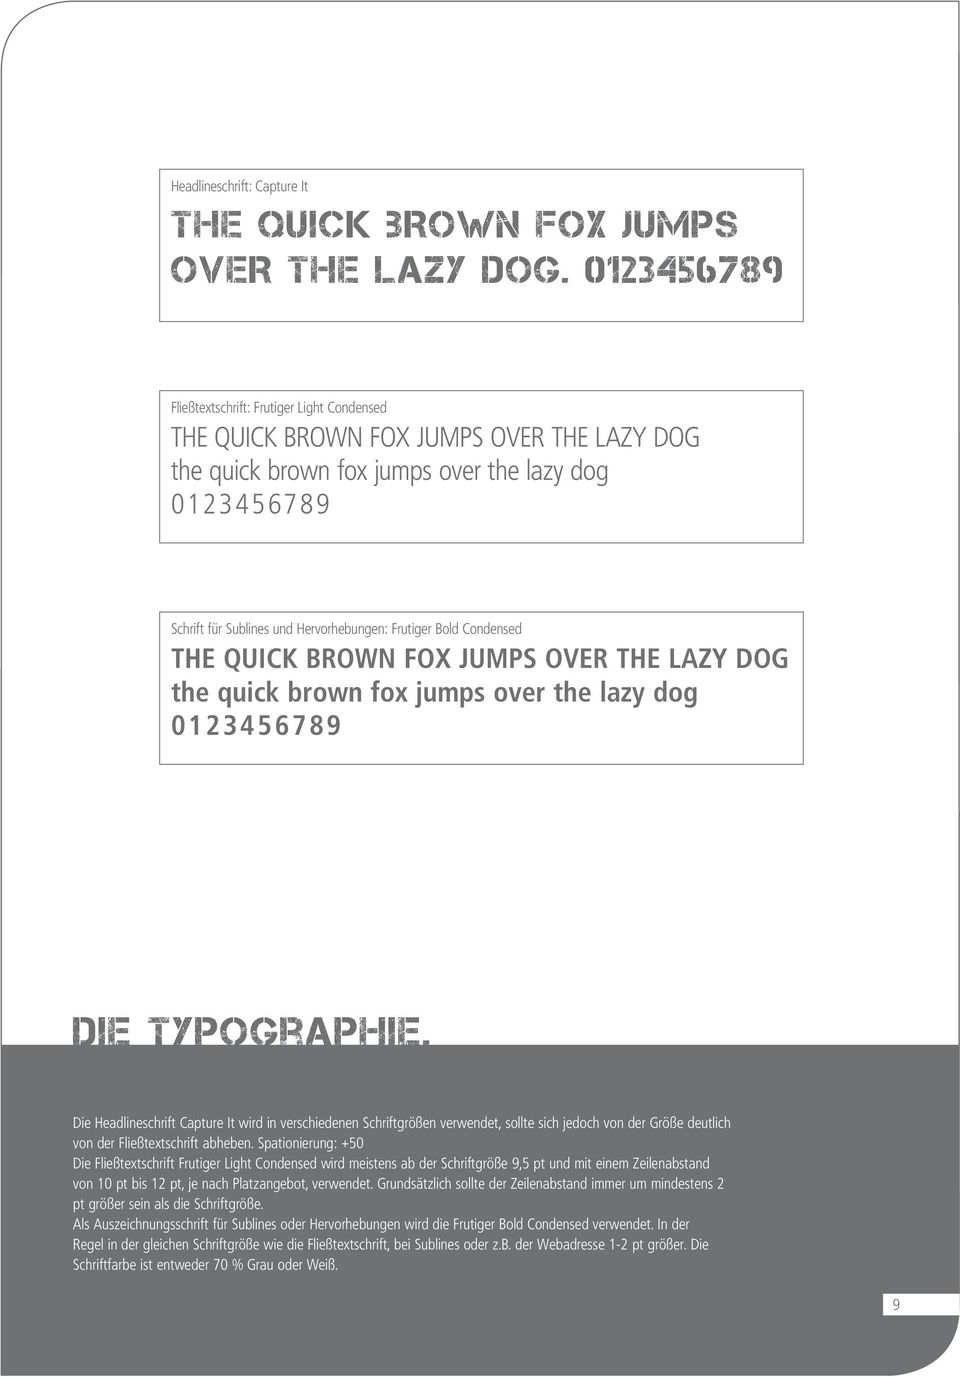 Frutiger Bold Condensed The quick brown fox jumps over the lazy dog the quick brown fox jumps over the lazy dog 0123456789 die typographie.